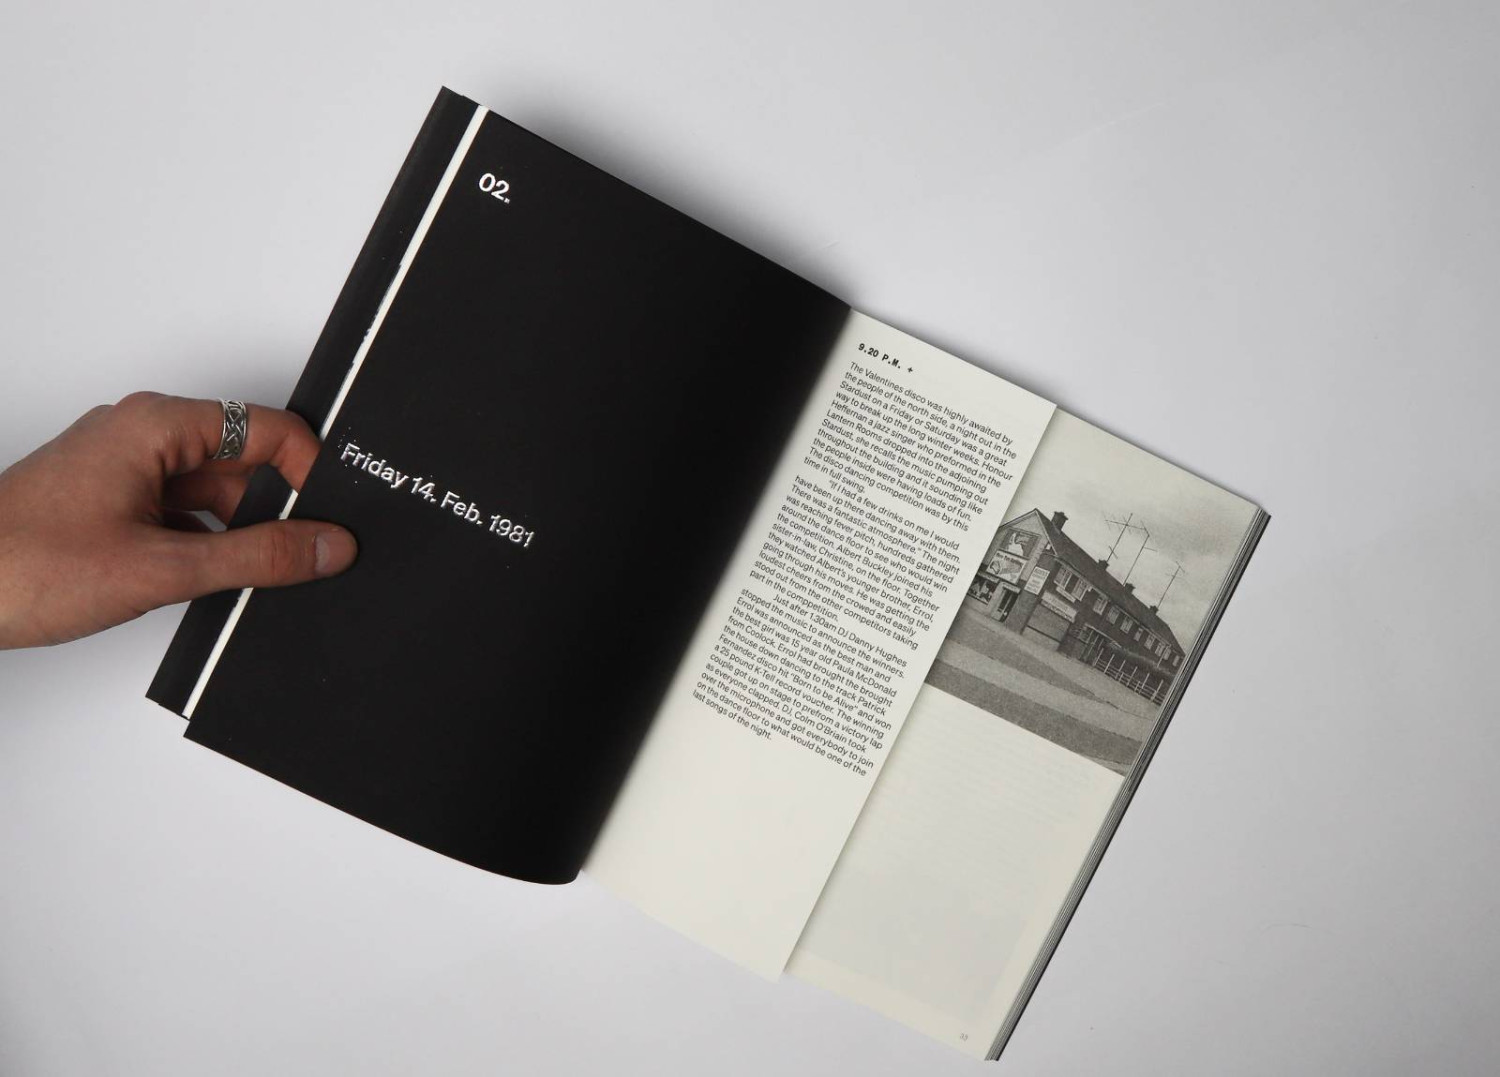 The purpose of this contemporary publication, is to visually narrate through typography and photography, the story of the 1981 Stardust fire disaster. Using personal interviews, photography and research as well as excerpts from the 2006 book, 'They Never Came Home:The Stardust Story' by Tony McCullagh and Neil Fetherstonhaugh, the design is intended to have an effect on the reader and maintain the topic in the public's attention.